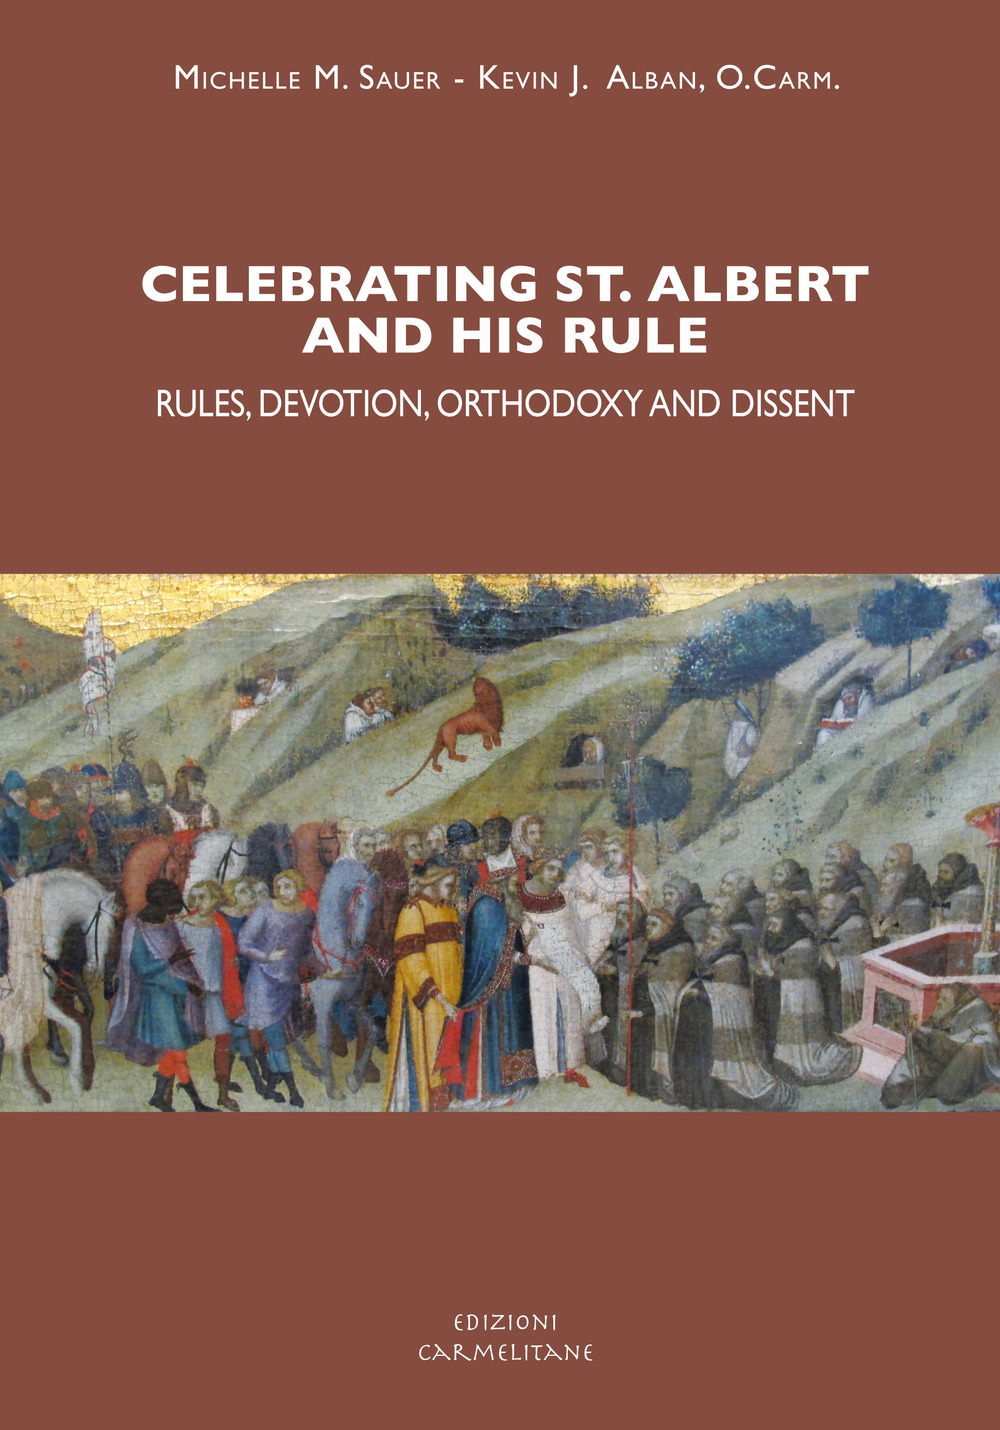 Celebrating st. Albert and his rule: rules, devotion, orthodoxy and dissent